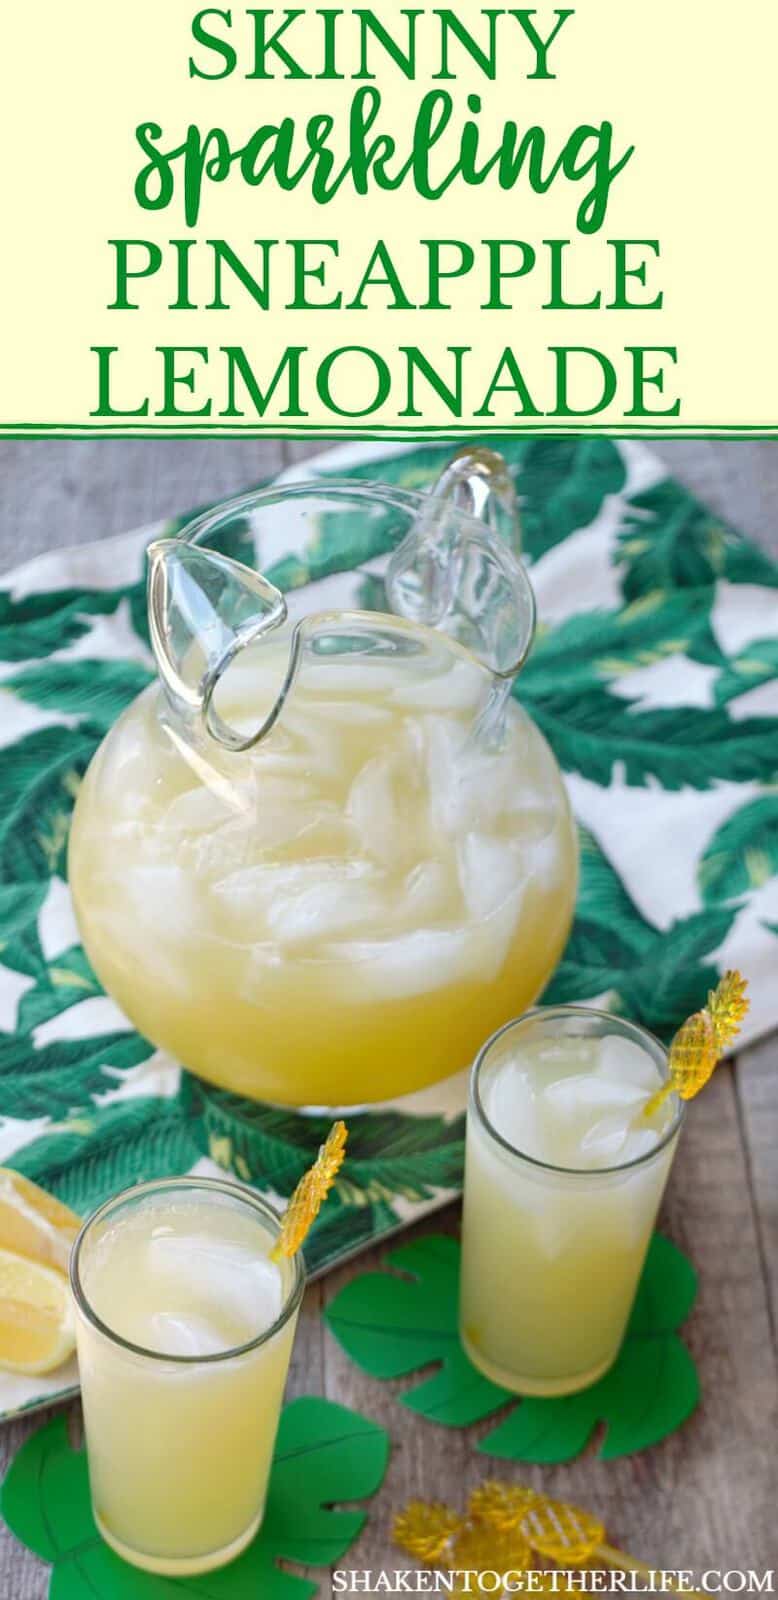 Skinny Sparkling Pineapple Lemonade Punch - 3 ingredients, 50 calories per glass and SO refreshing! This easy lemonade party punch is perfect for pool parties and warm weather get togethers!